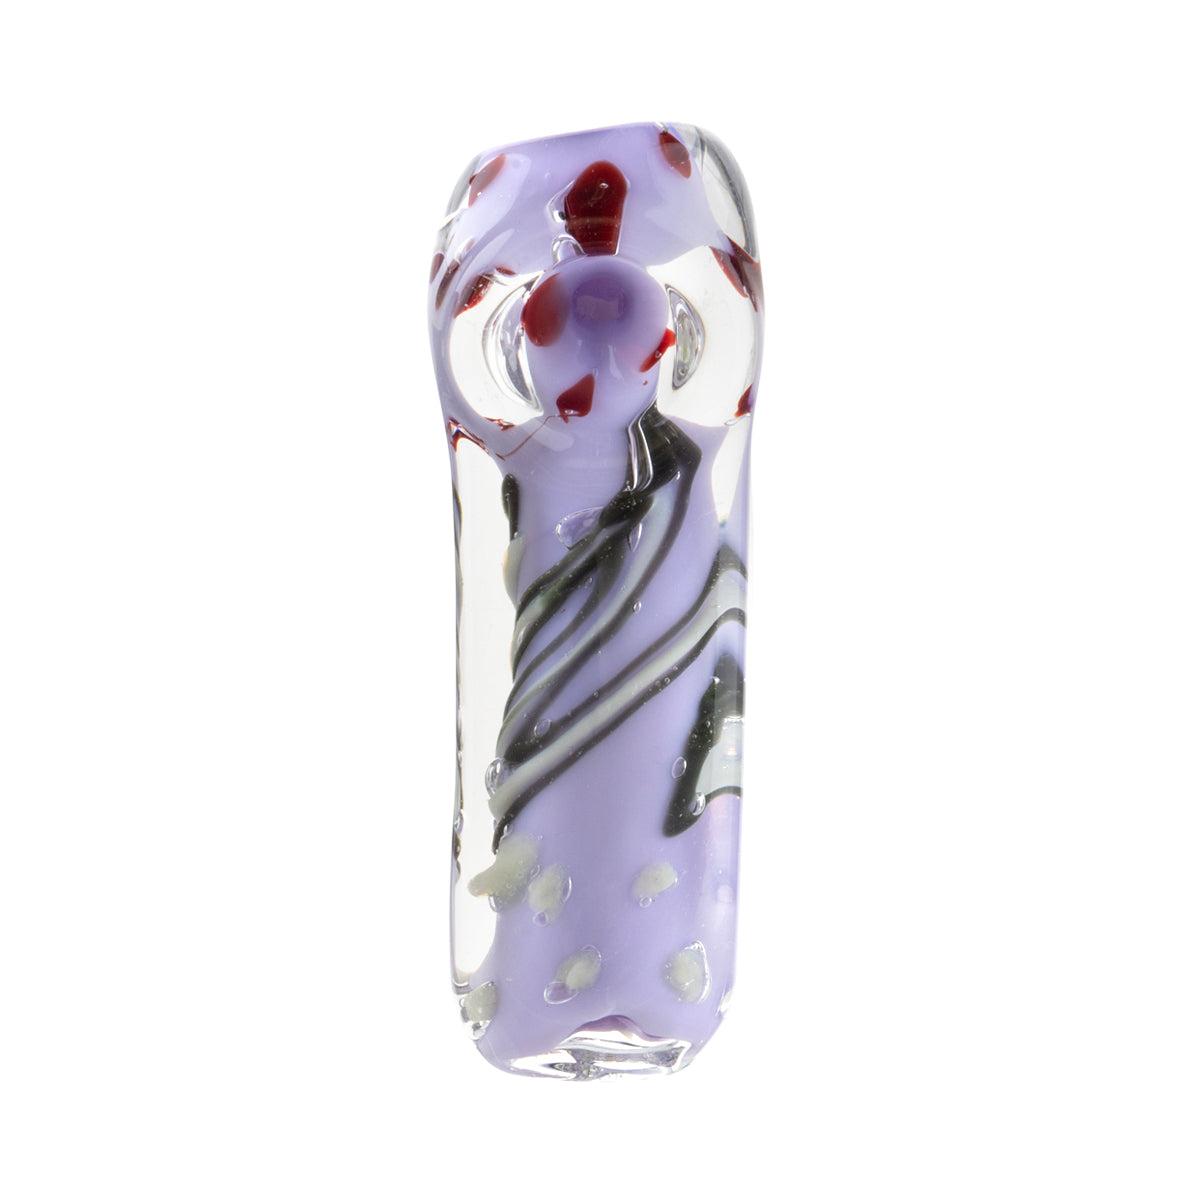 Hand Pipe | Brick Glass Hand Pipe Slyme Abstract Design | 3" - Glass - 3 Count Glass Hand Pipe Biohazard Inc   